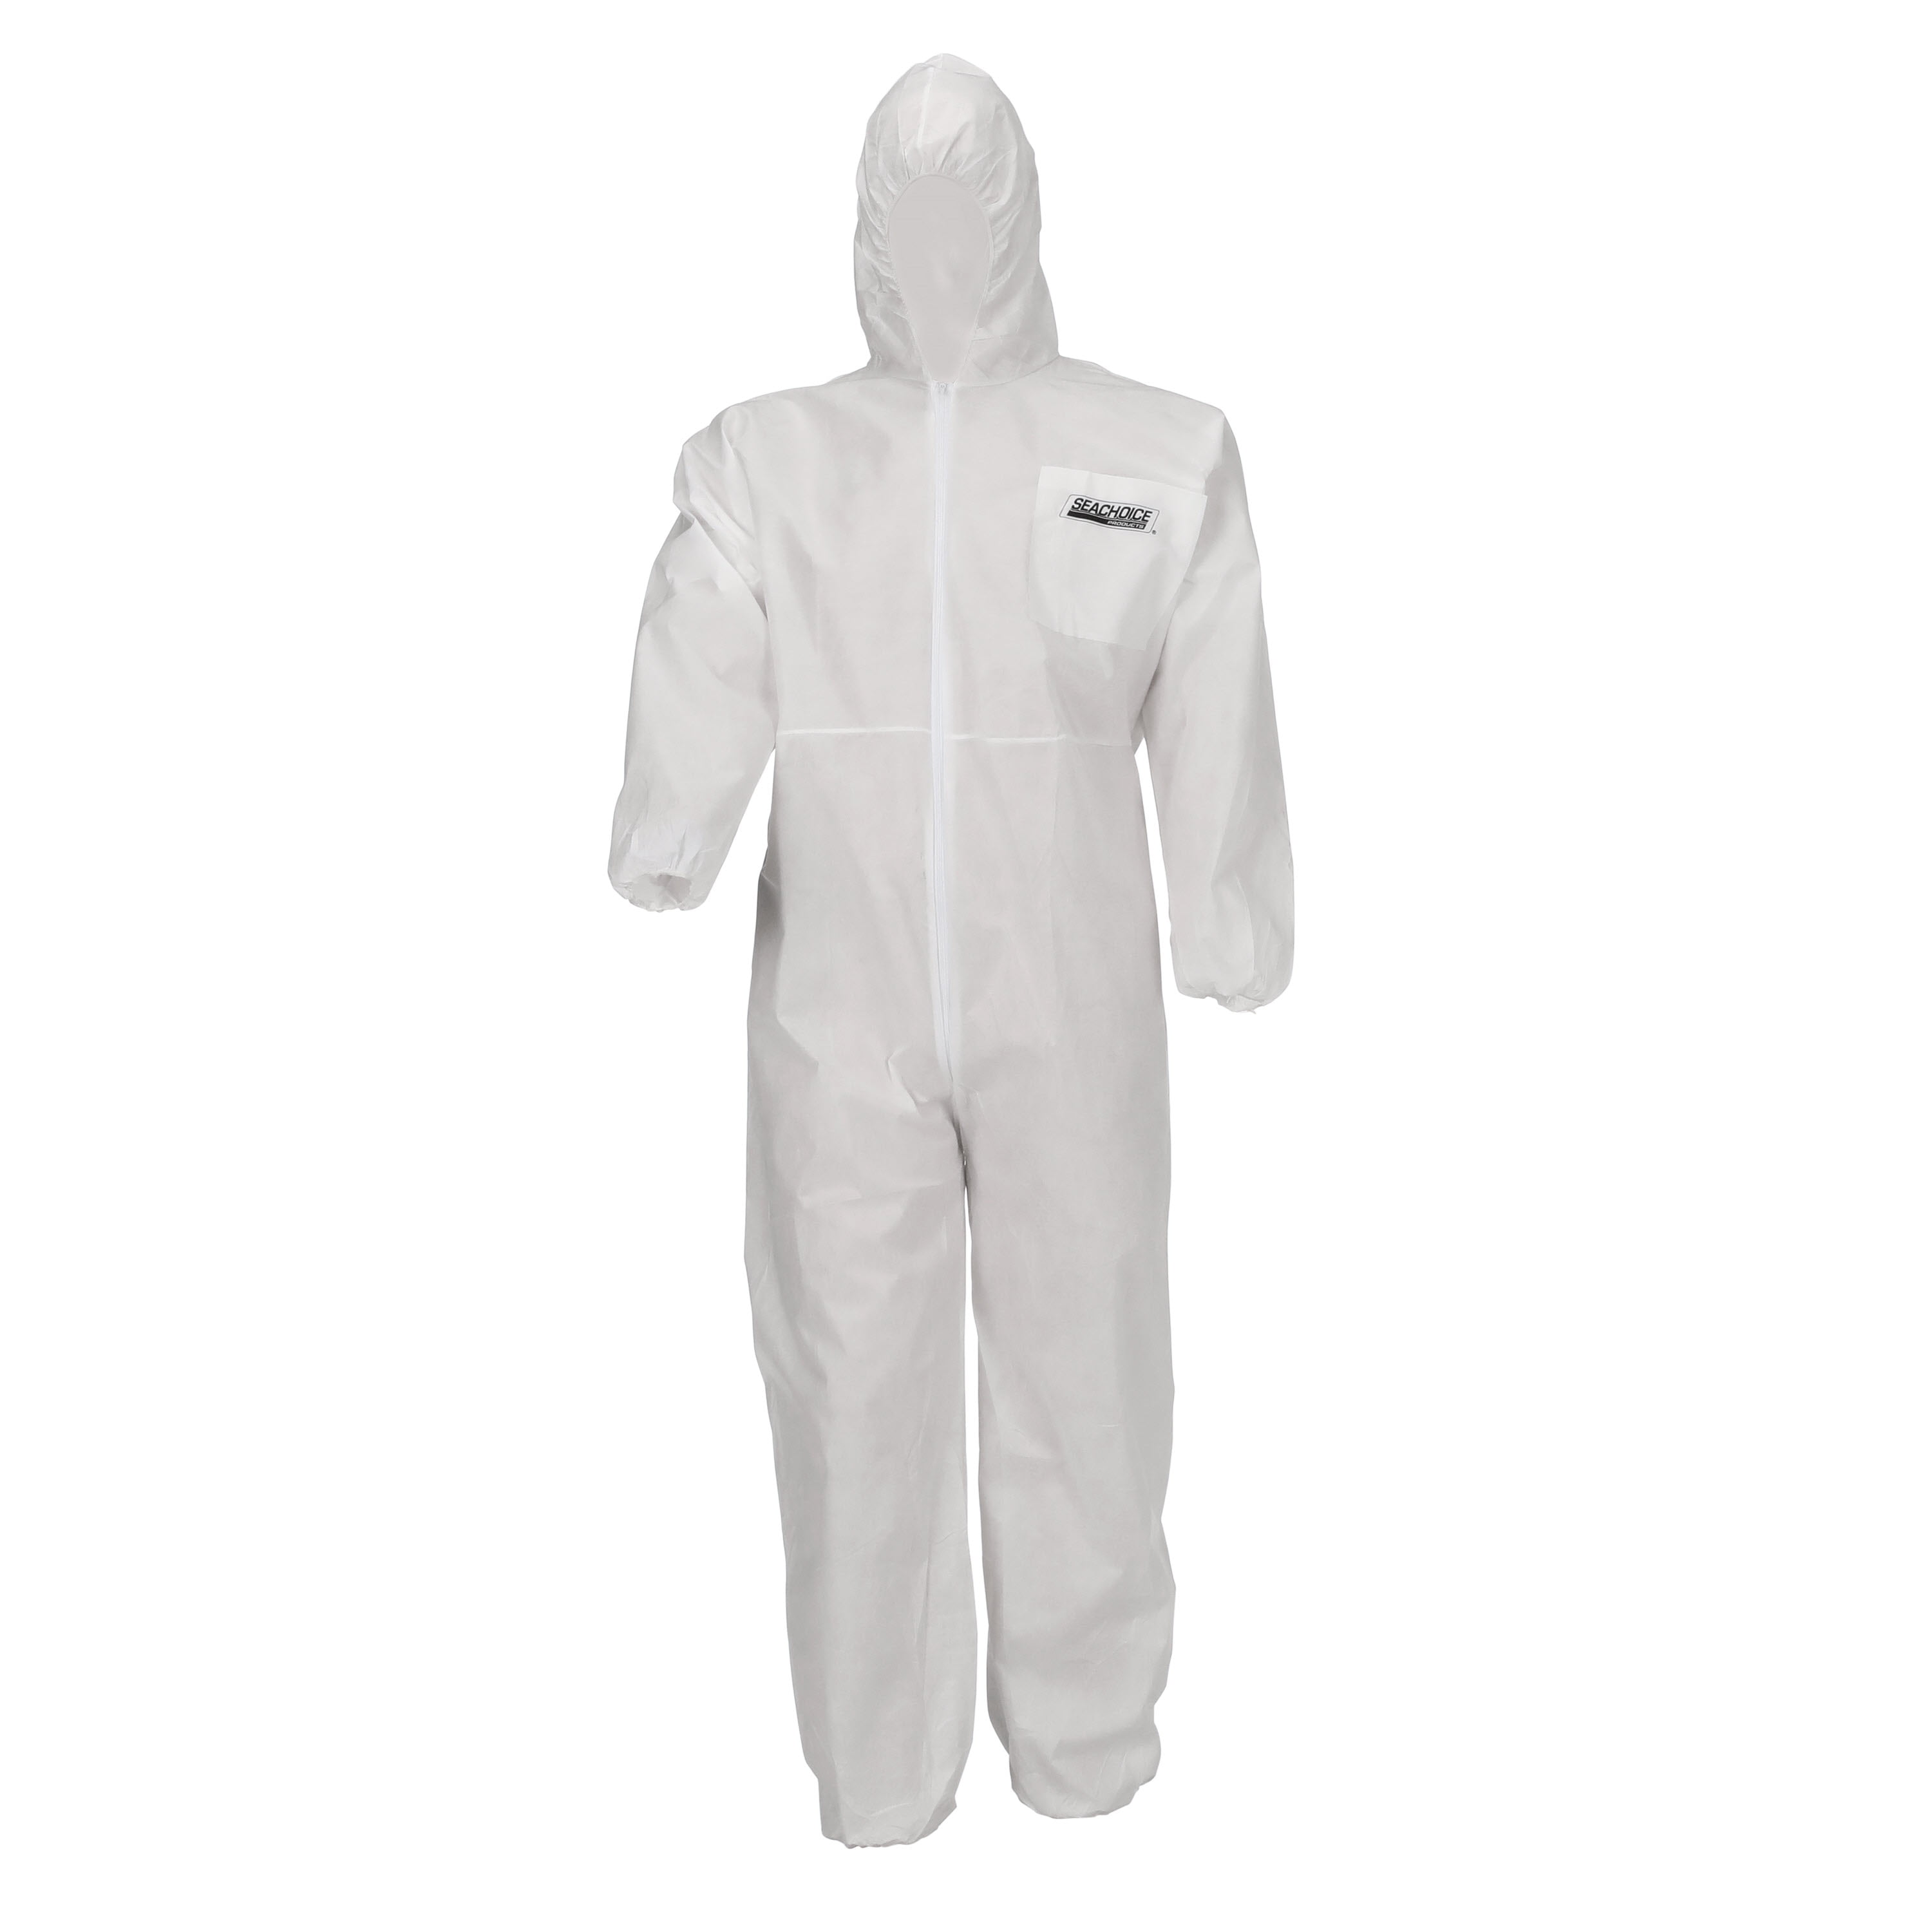 Coverall Disposable Suit Hooded Painting Dust Baby Work Cover Zipper DIY Care 